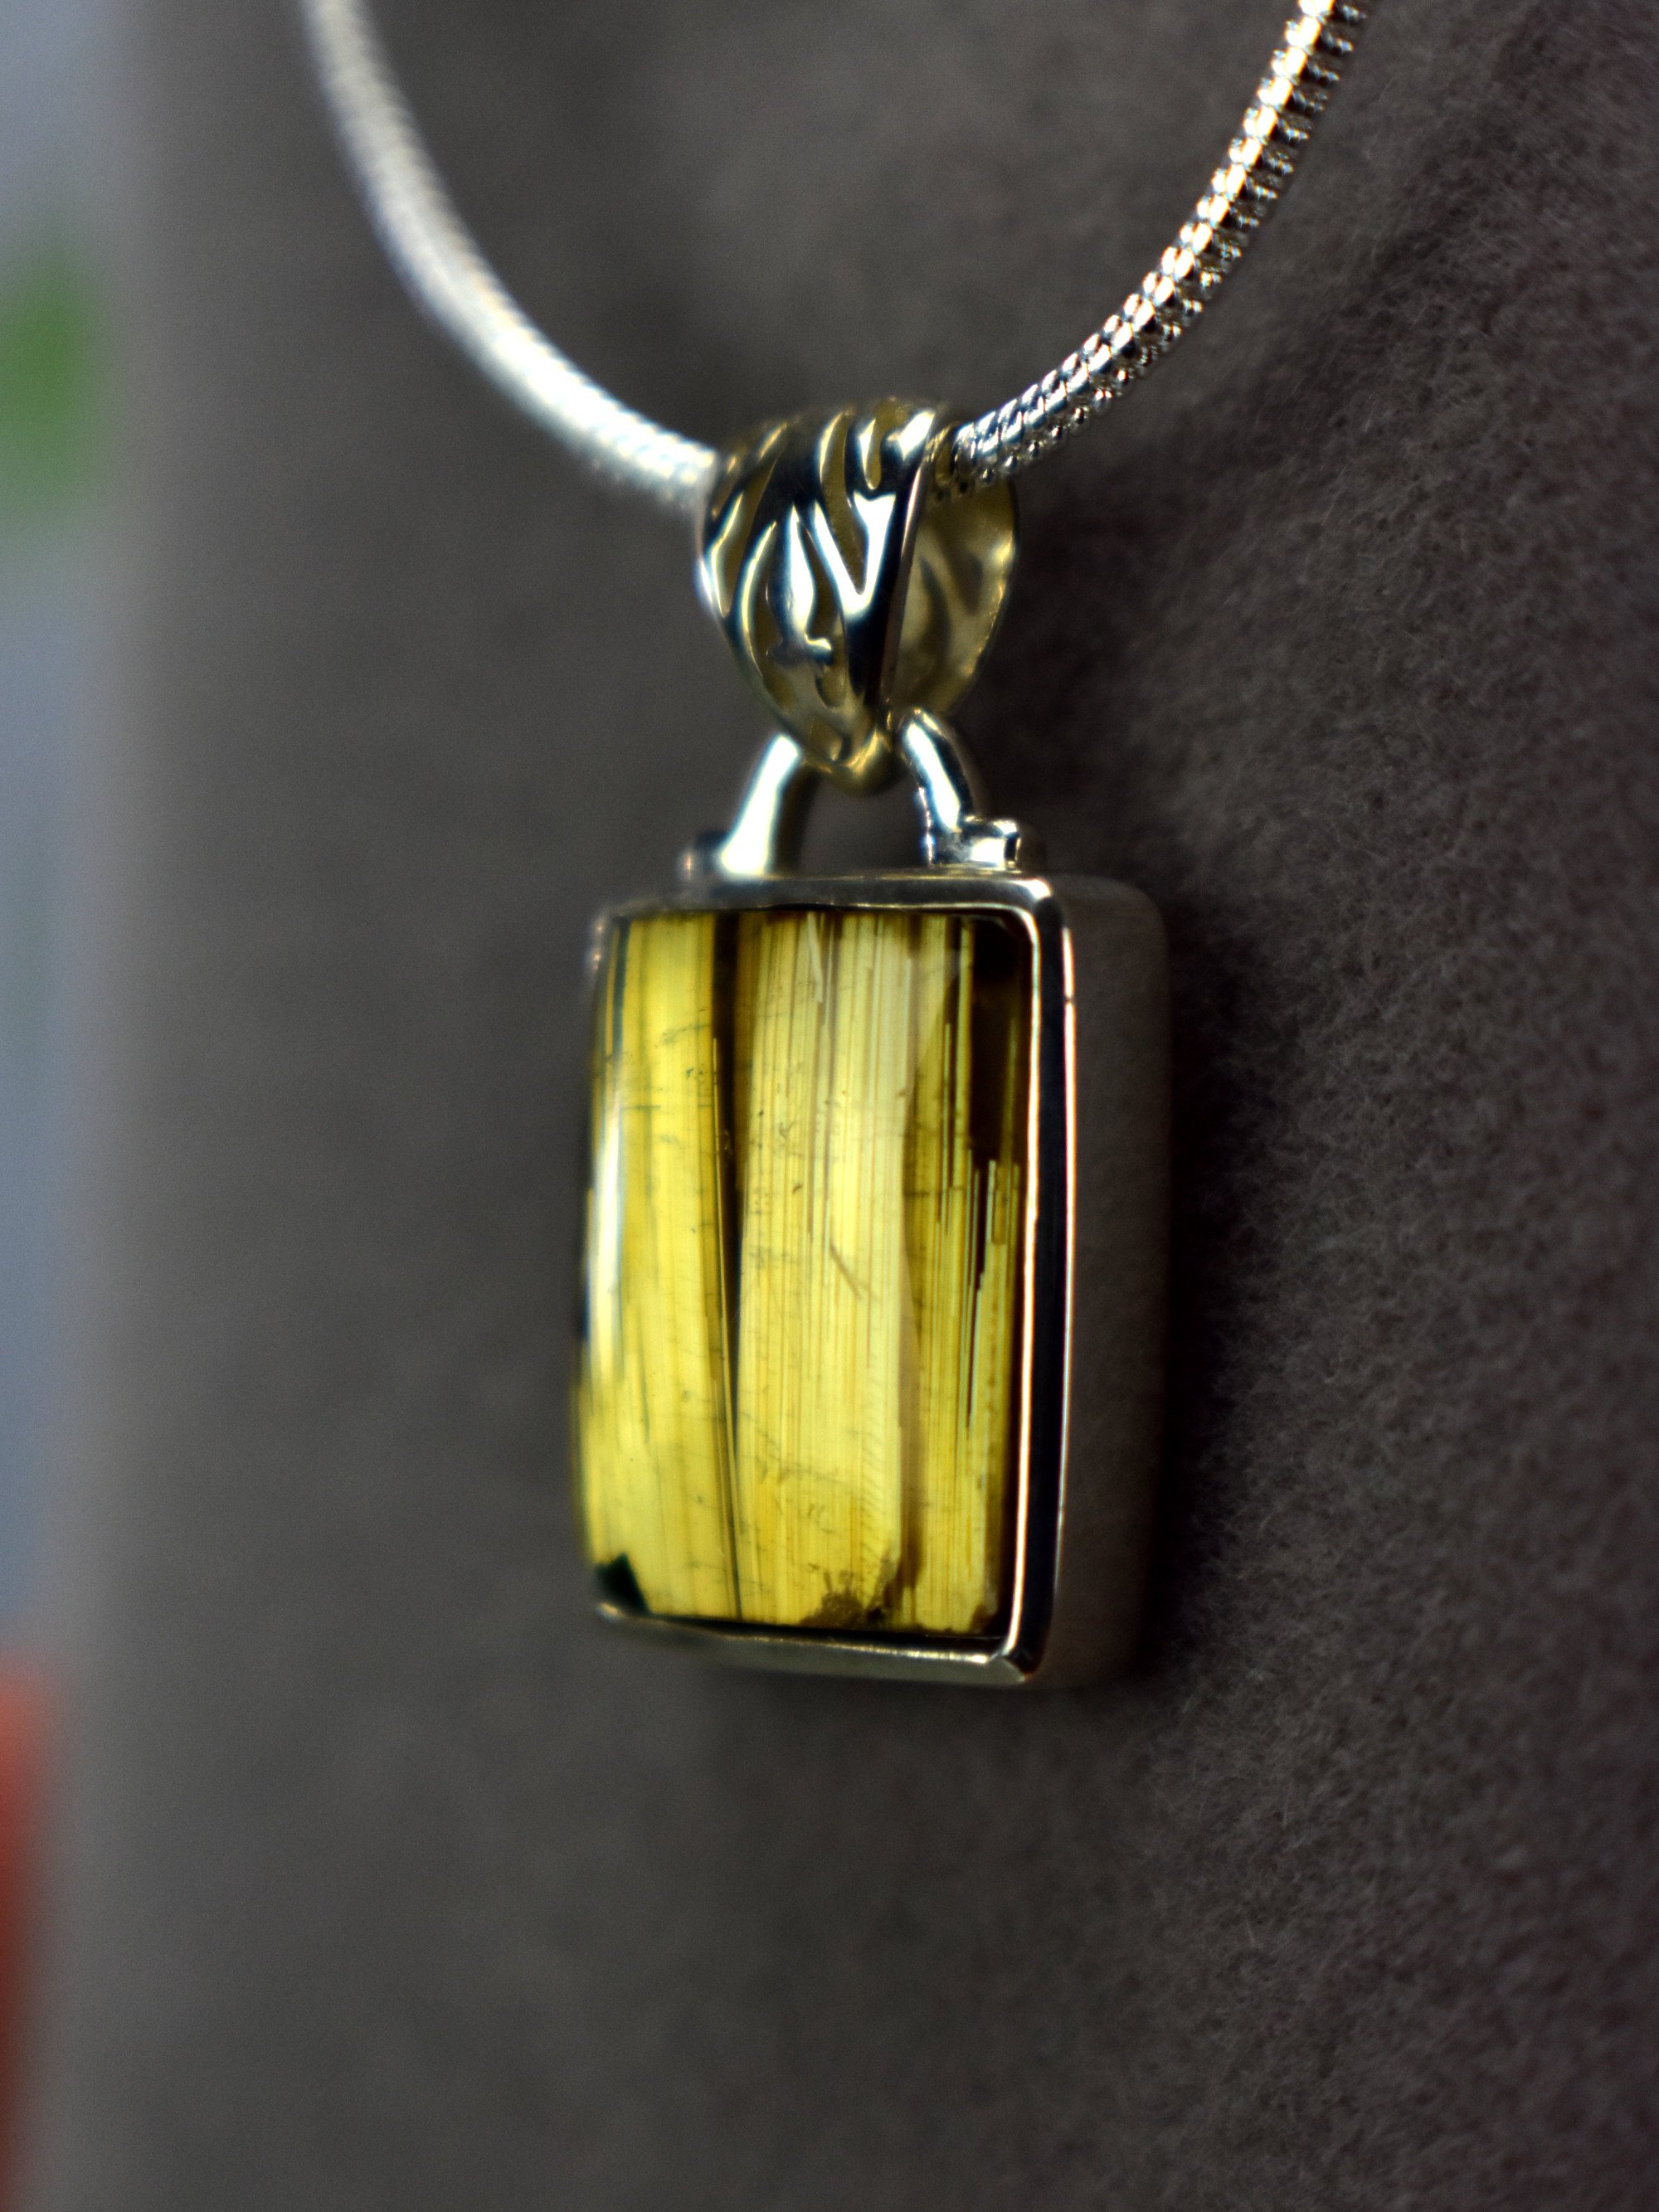 EXCLUSIVE! Golden Rutilated Titanium Clear Quartz Pendant Rutile Gem Crystal Jewelry Sterling Silver Master Series - DelphyCrystals